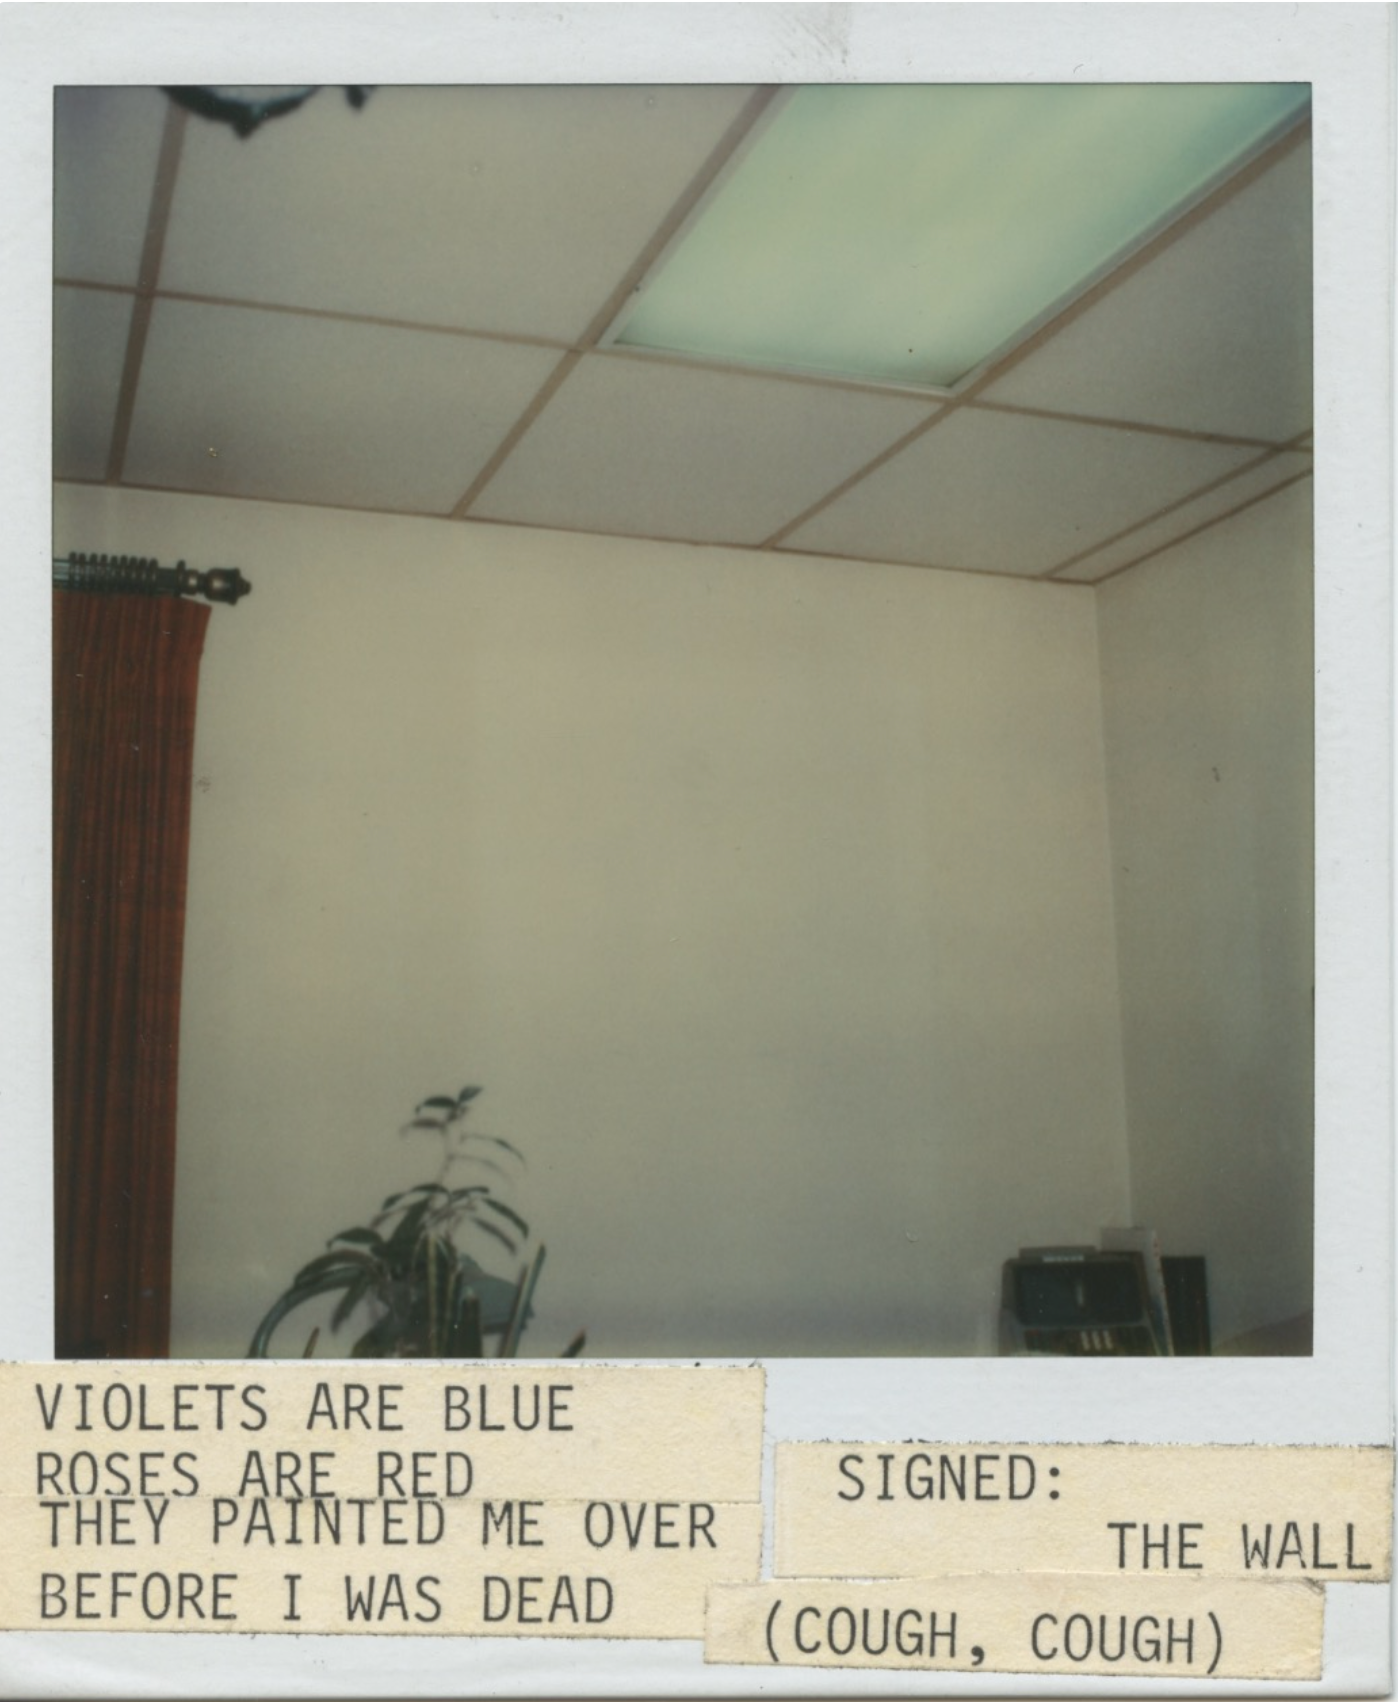 [Violets Are Blue] Polaroid Photograph with Poem